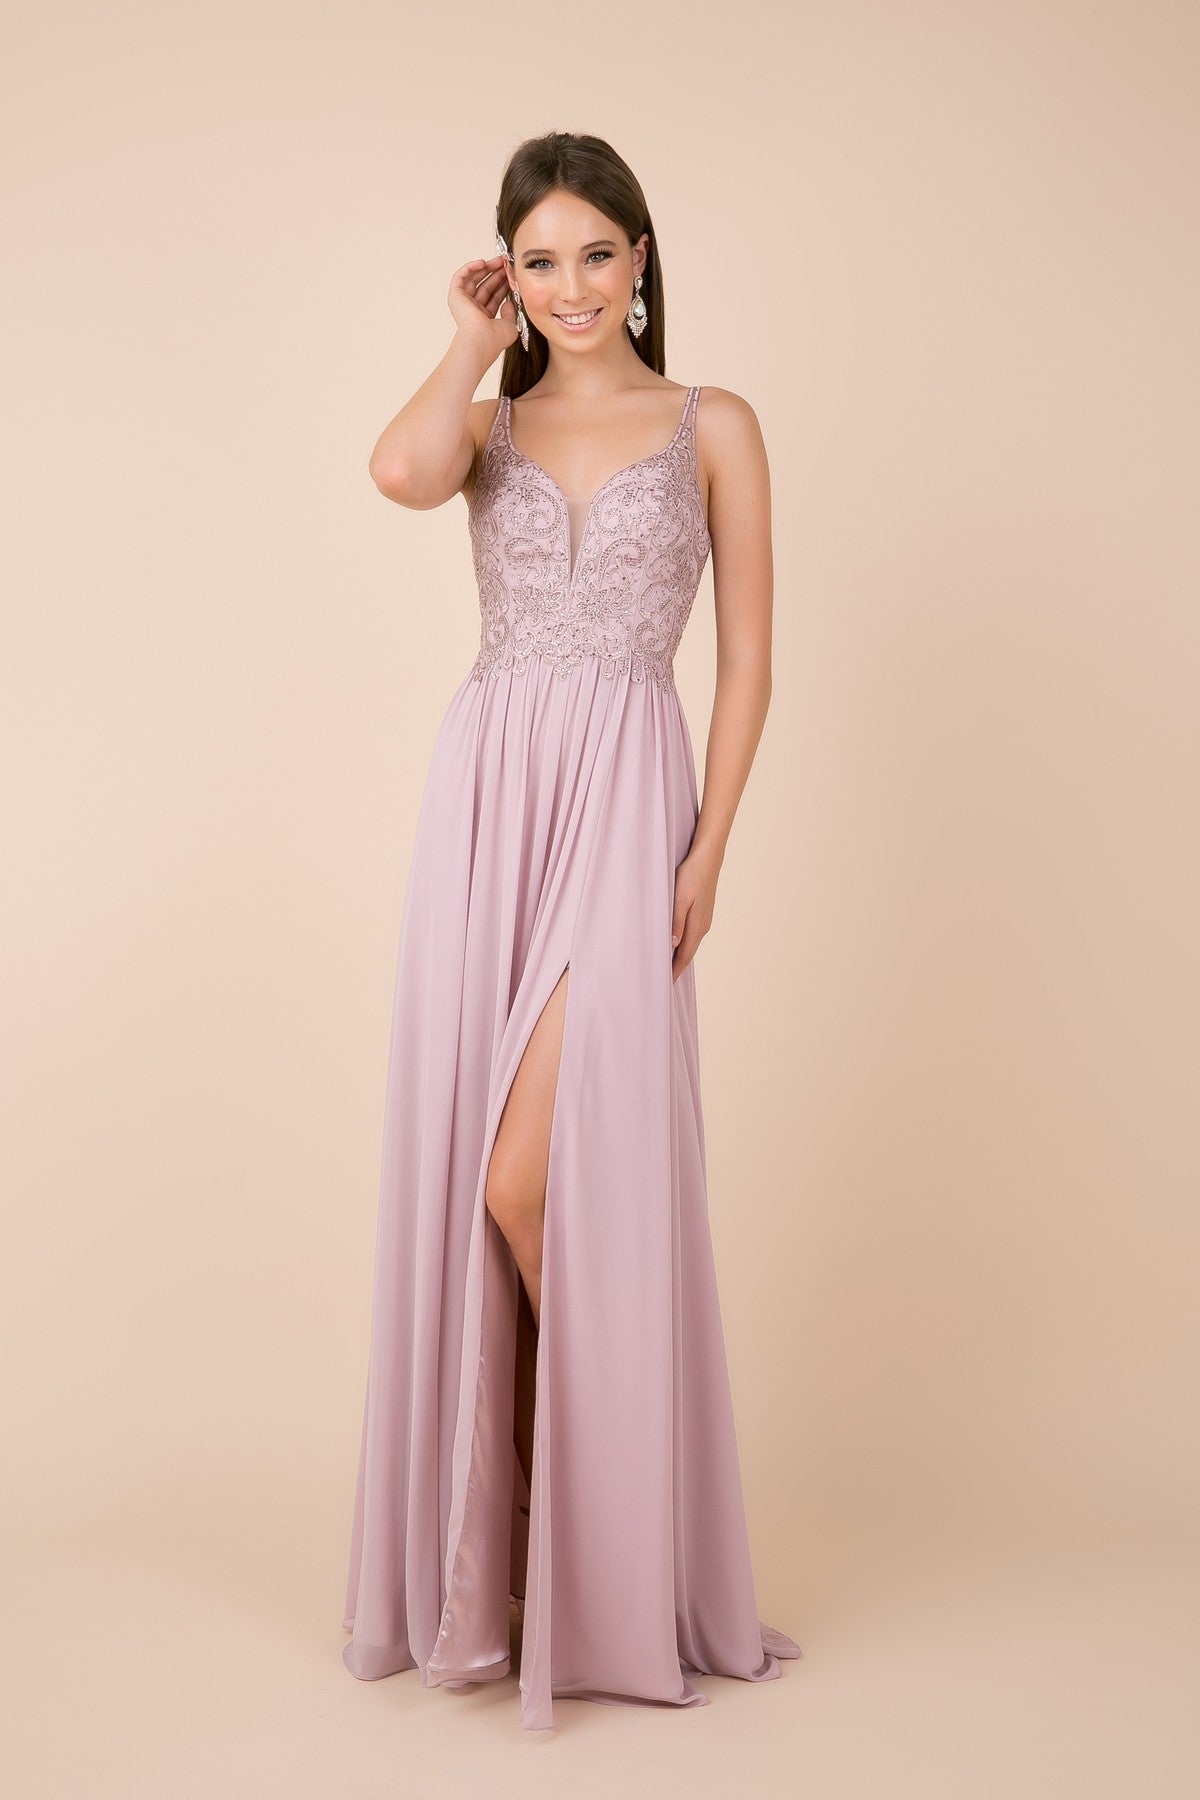 Long A-Line Dress With Embellished Bodice By Nox Anabel -Y299